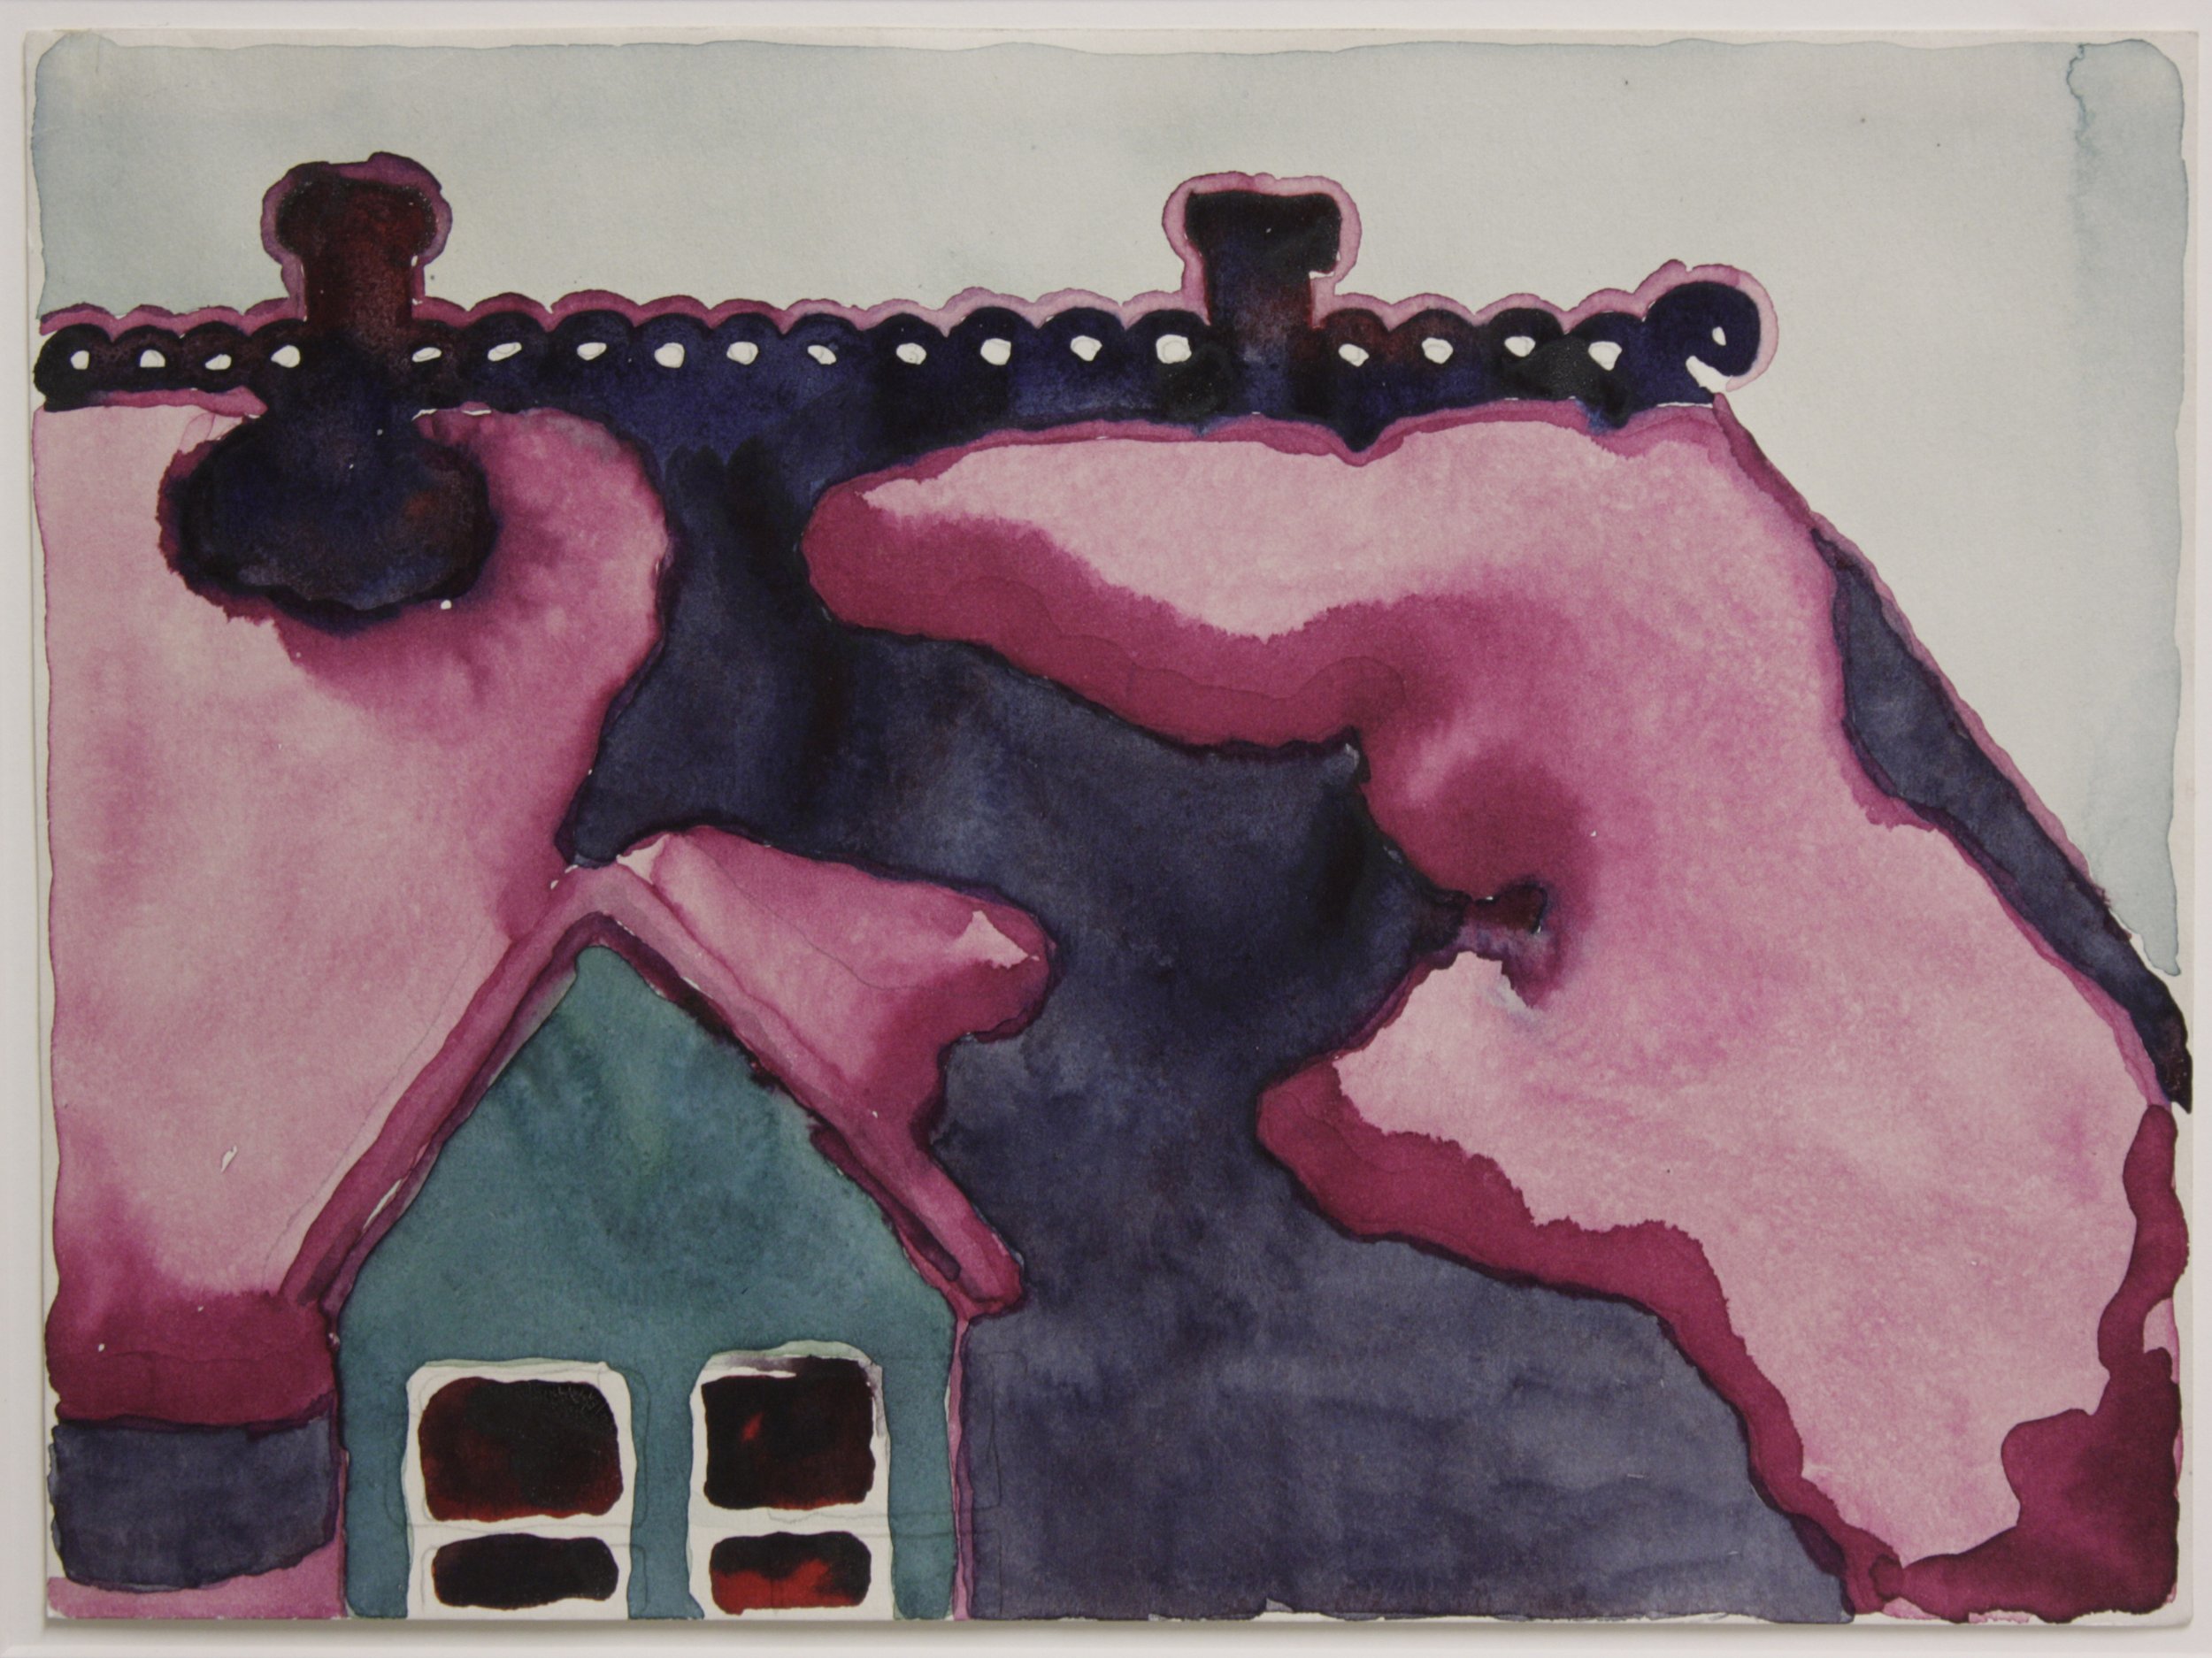   GEORGIA O’KEEFFE ,   (American, 1887-1986),  Roof with Snow , 1917, Watercolor on paper, 8 5/8 x 11 3/4 inches, Collection of the Amarillo Museum of Art, Purchased with funds from the National Endowment for the Arts, Amarillo Area Foundation, Amari